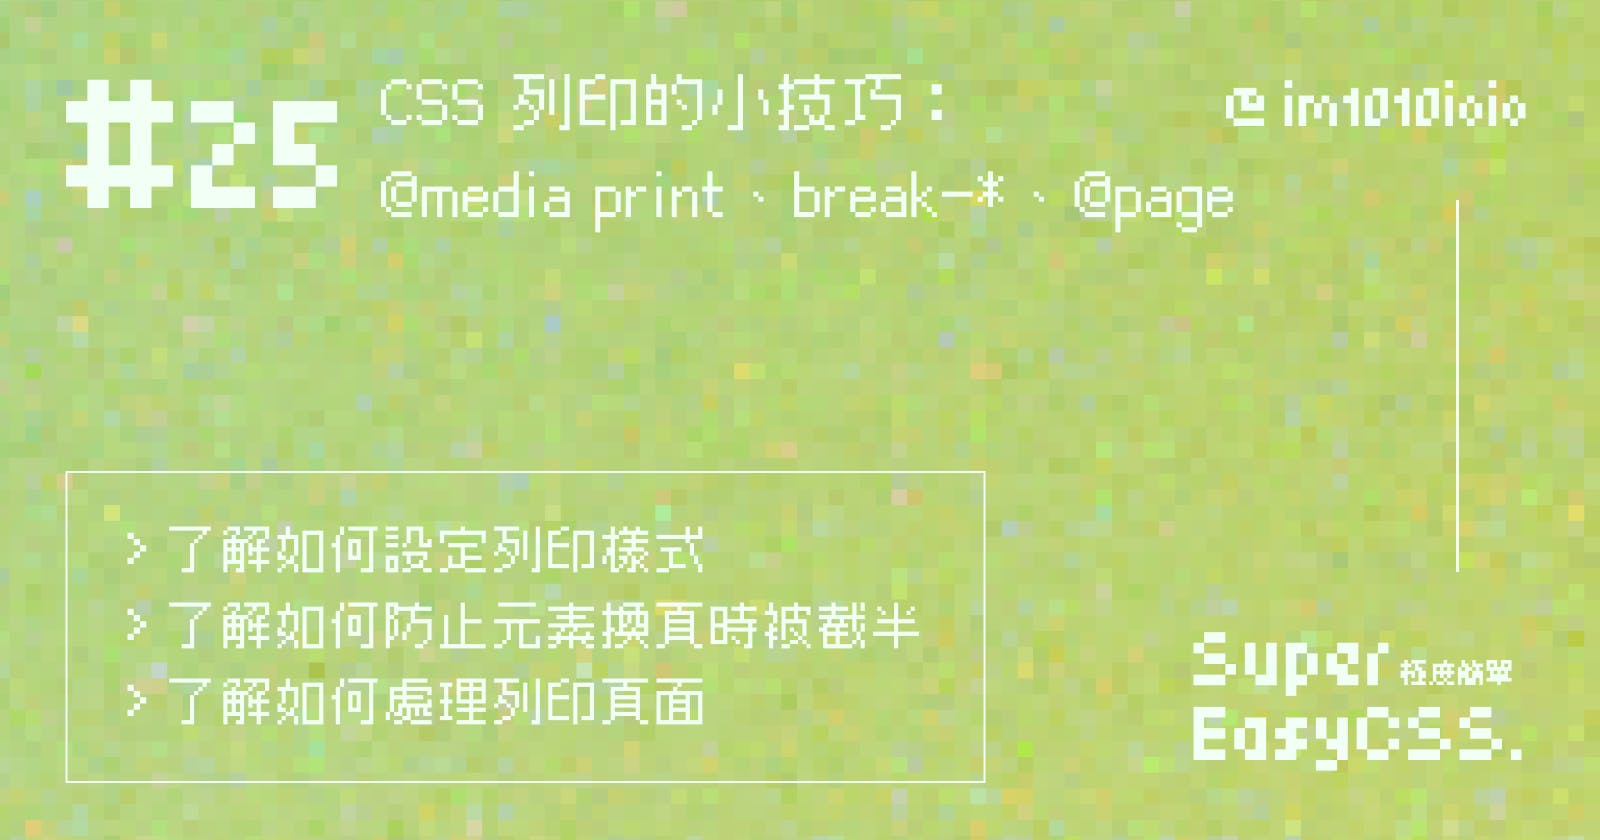 #25 CSS 列印的小技巧：@media print、break-before/after/inside、@page